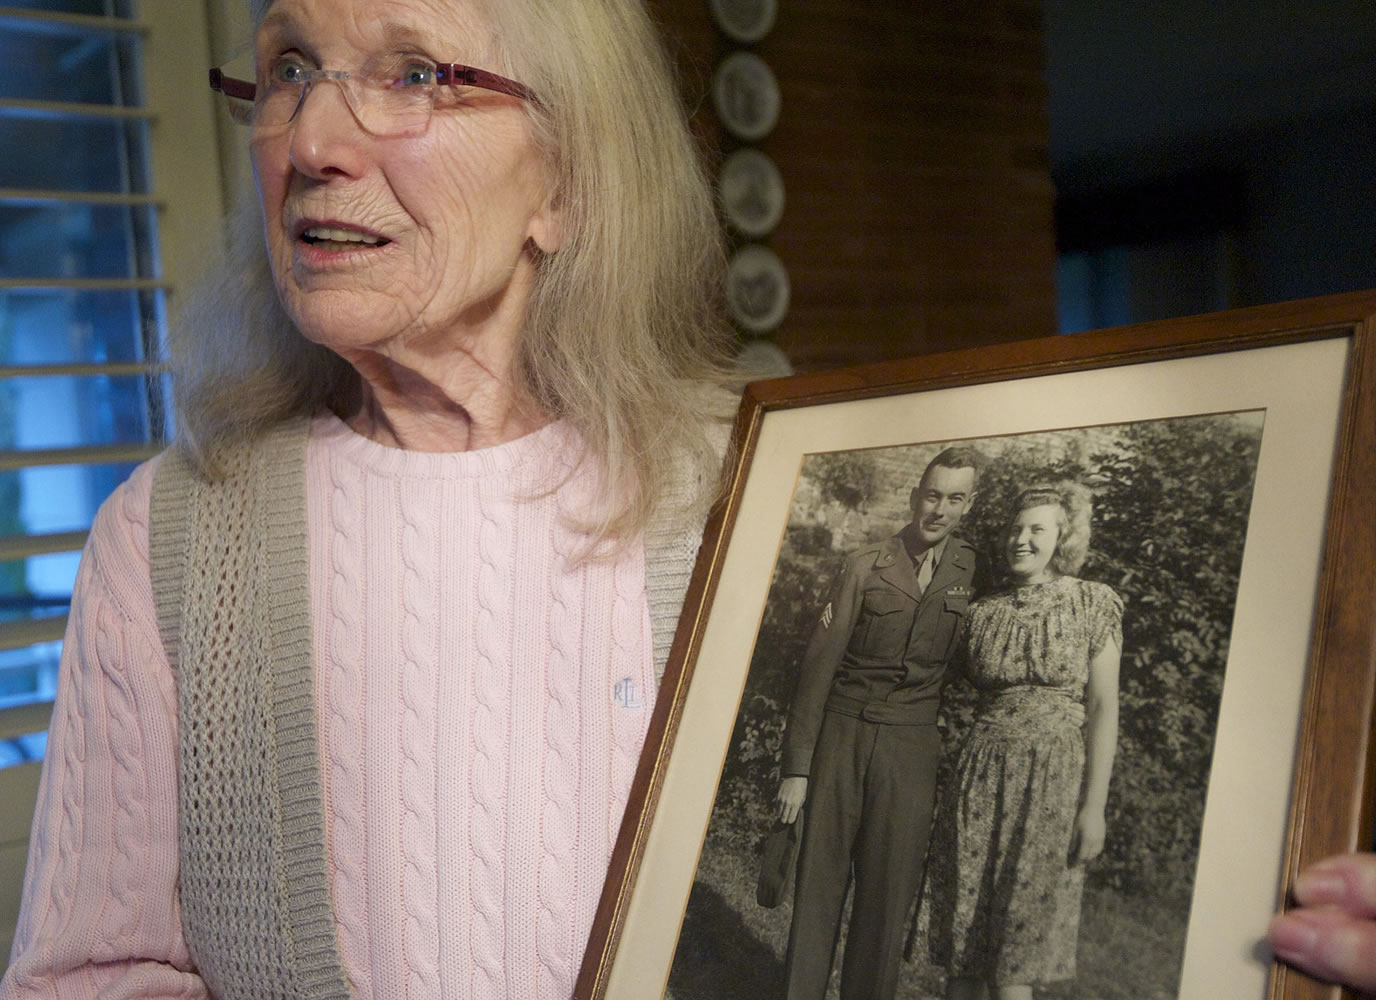 Gerda McMillan holds a 66-year-old old photograph of herself and her late husband taken during the American occupation of Germany following World War II.